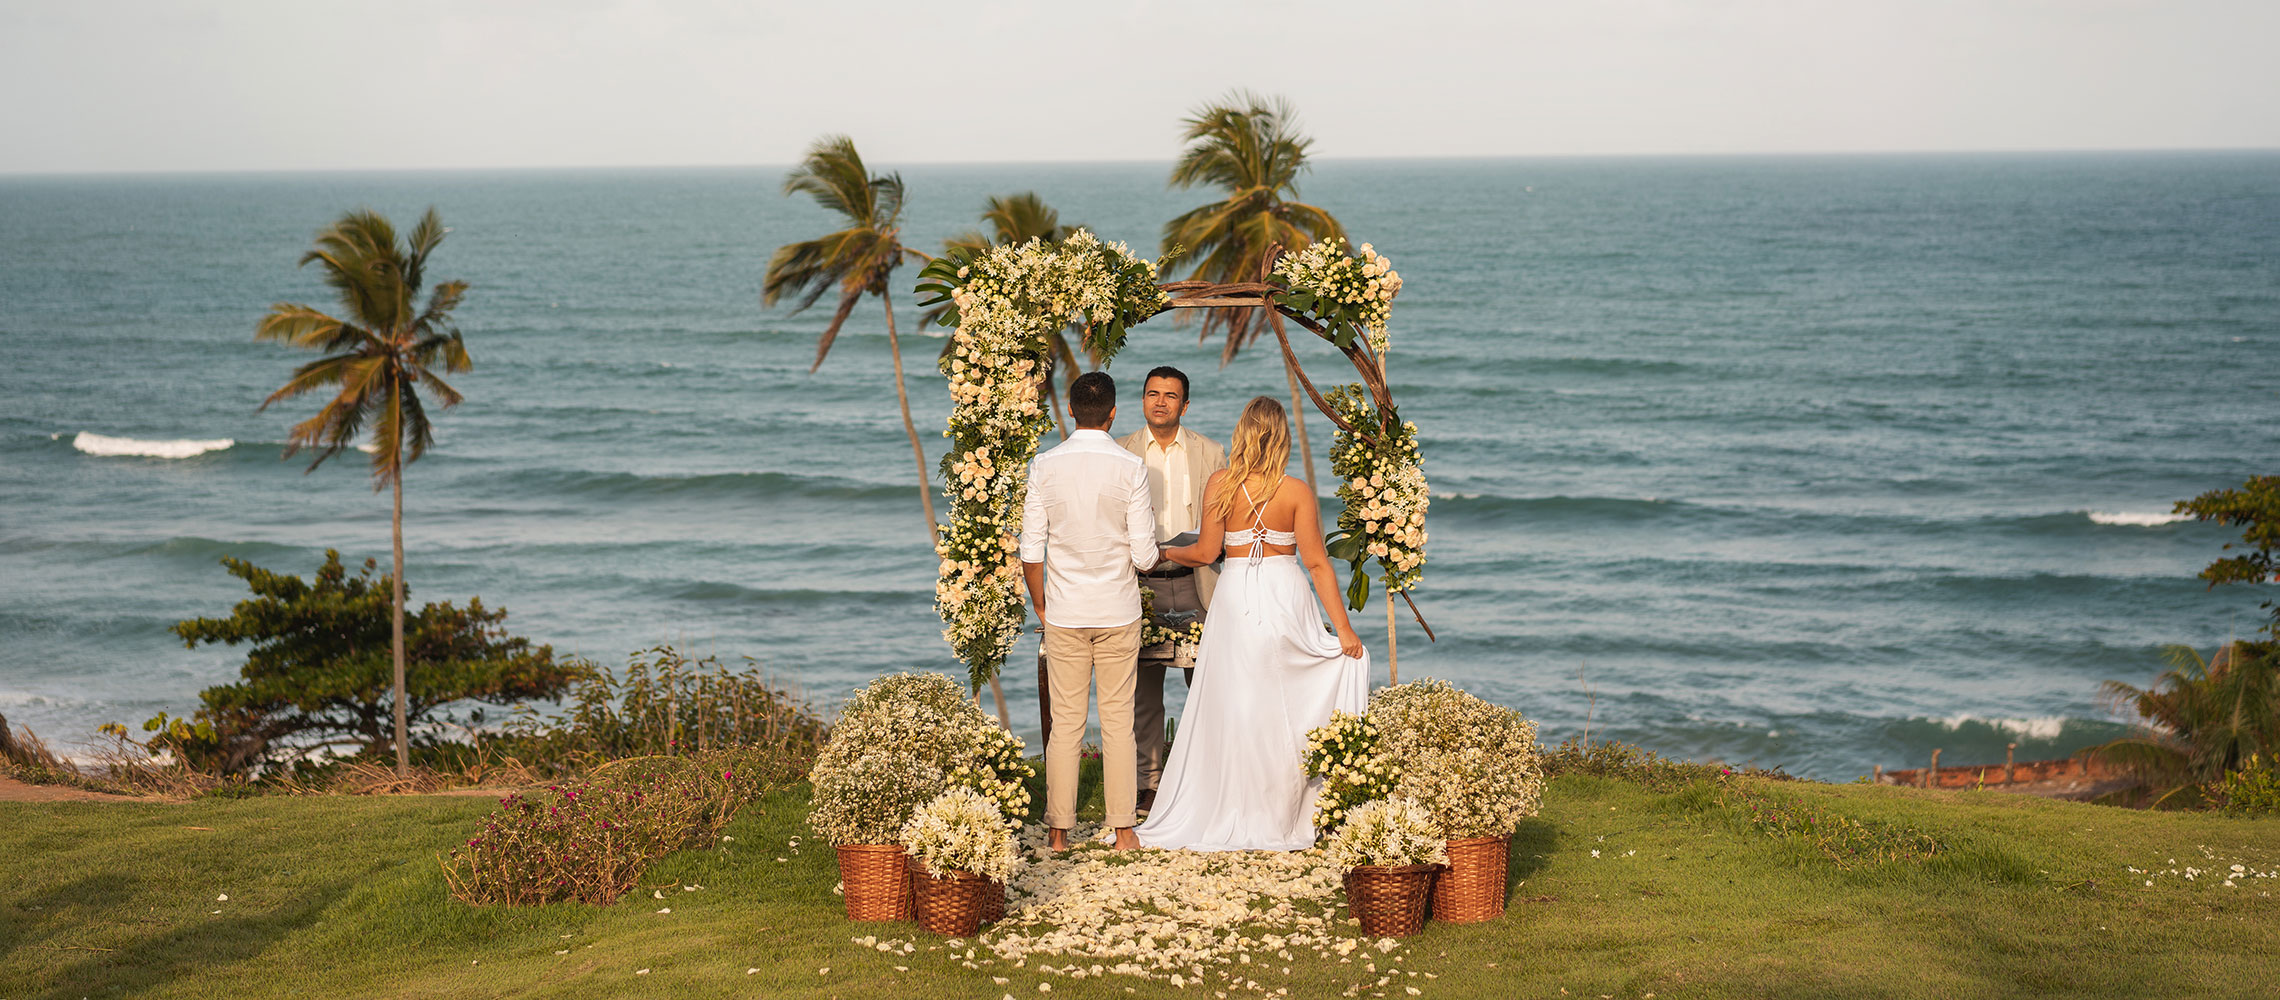 photo of a wedding ceremony by the ocean shore